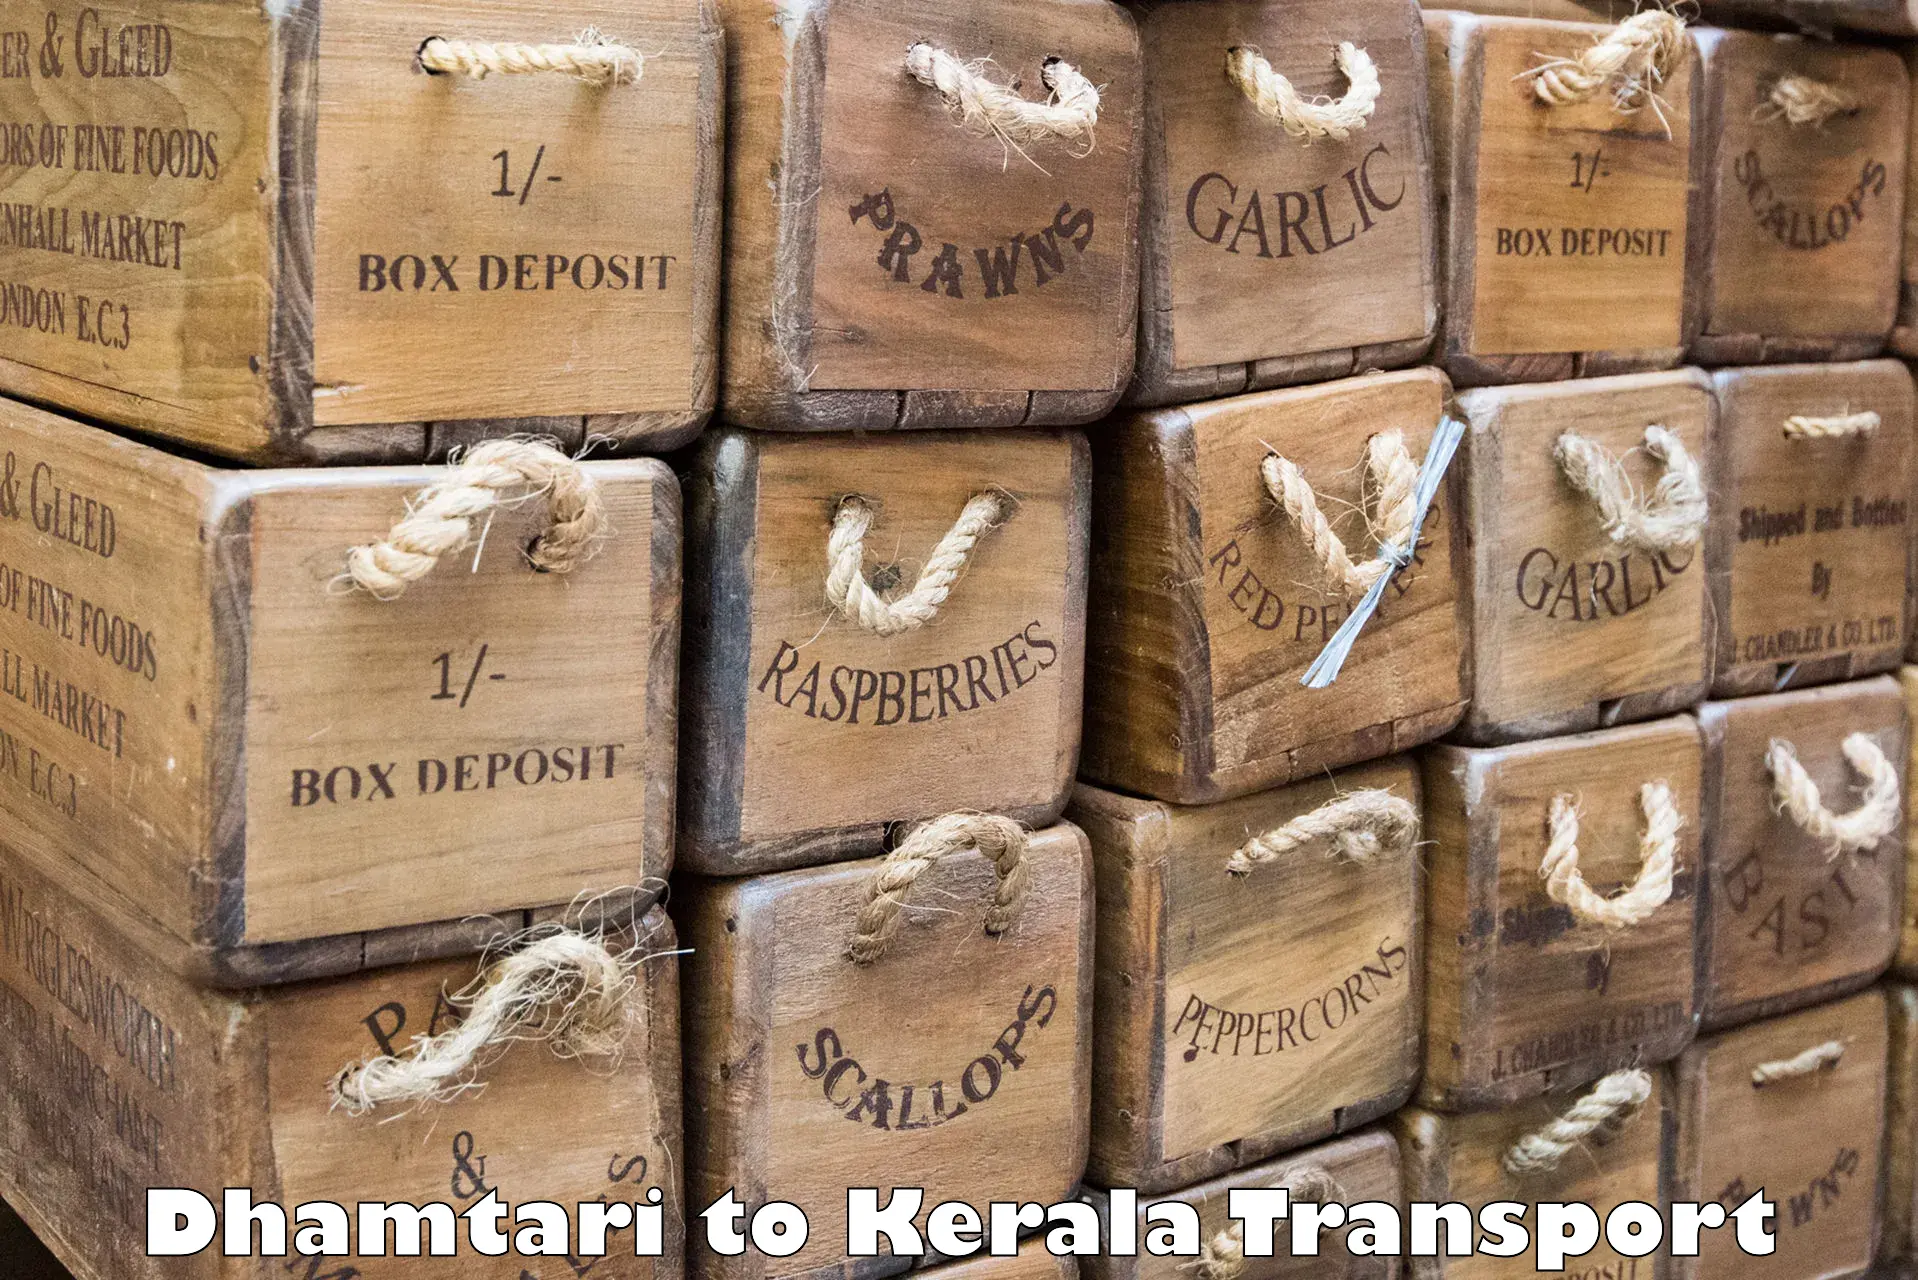 Air freight transport services Dhamtari to Kollam